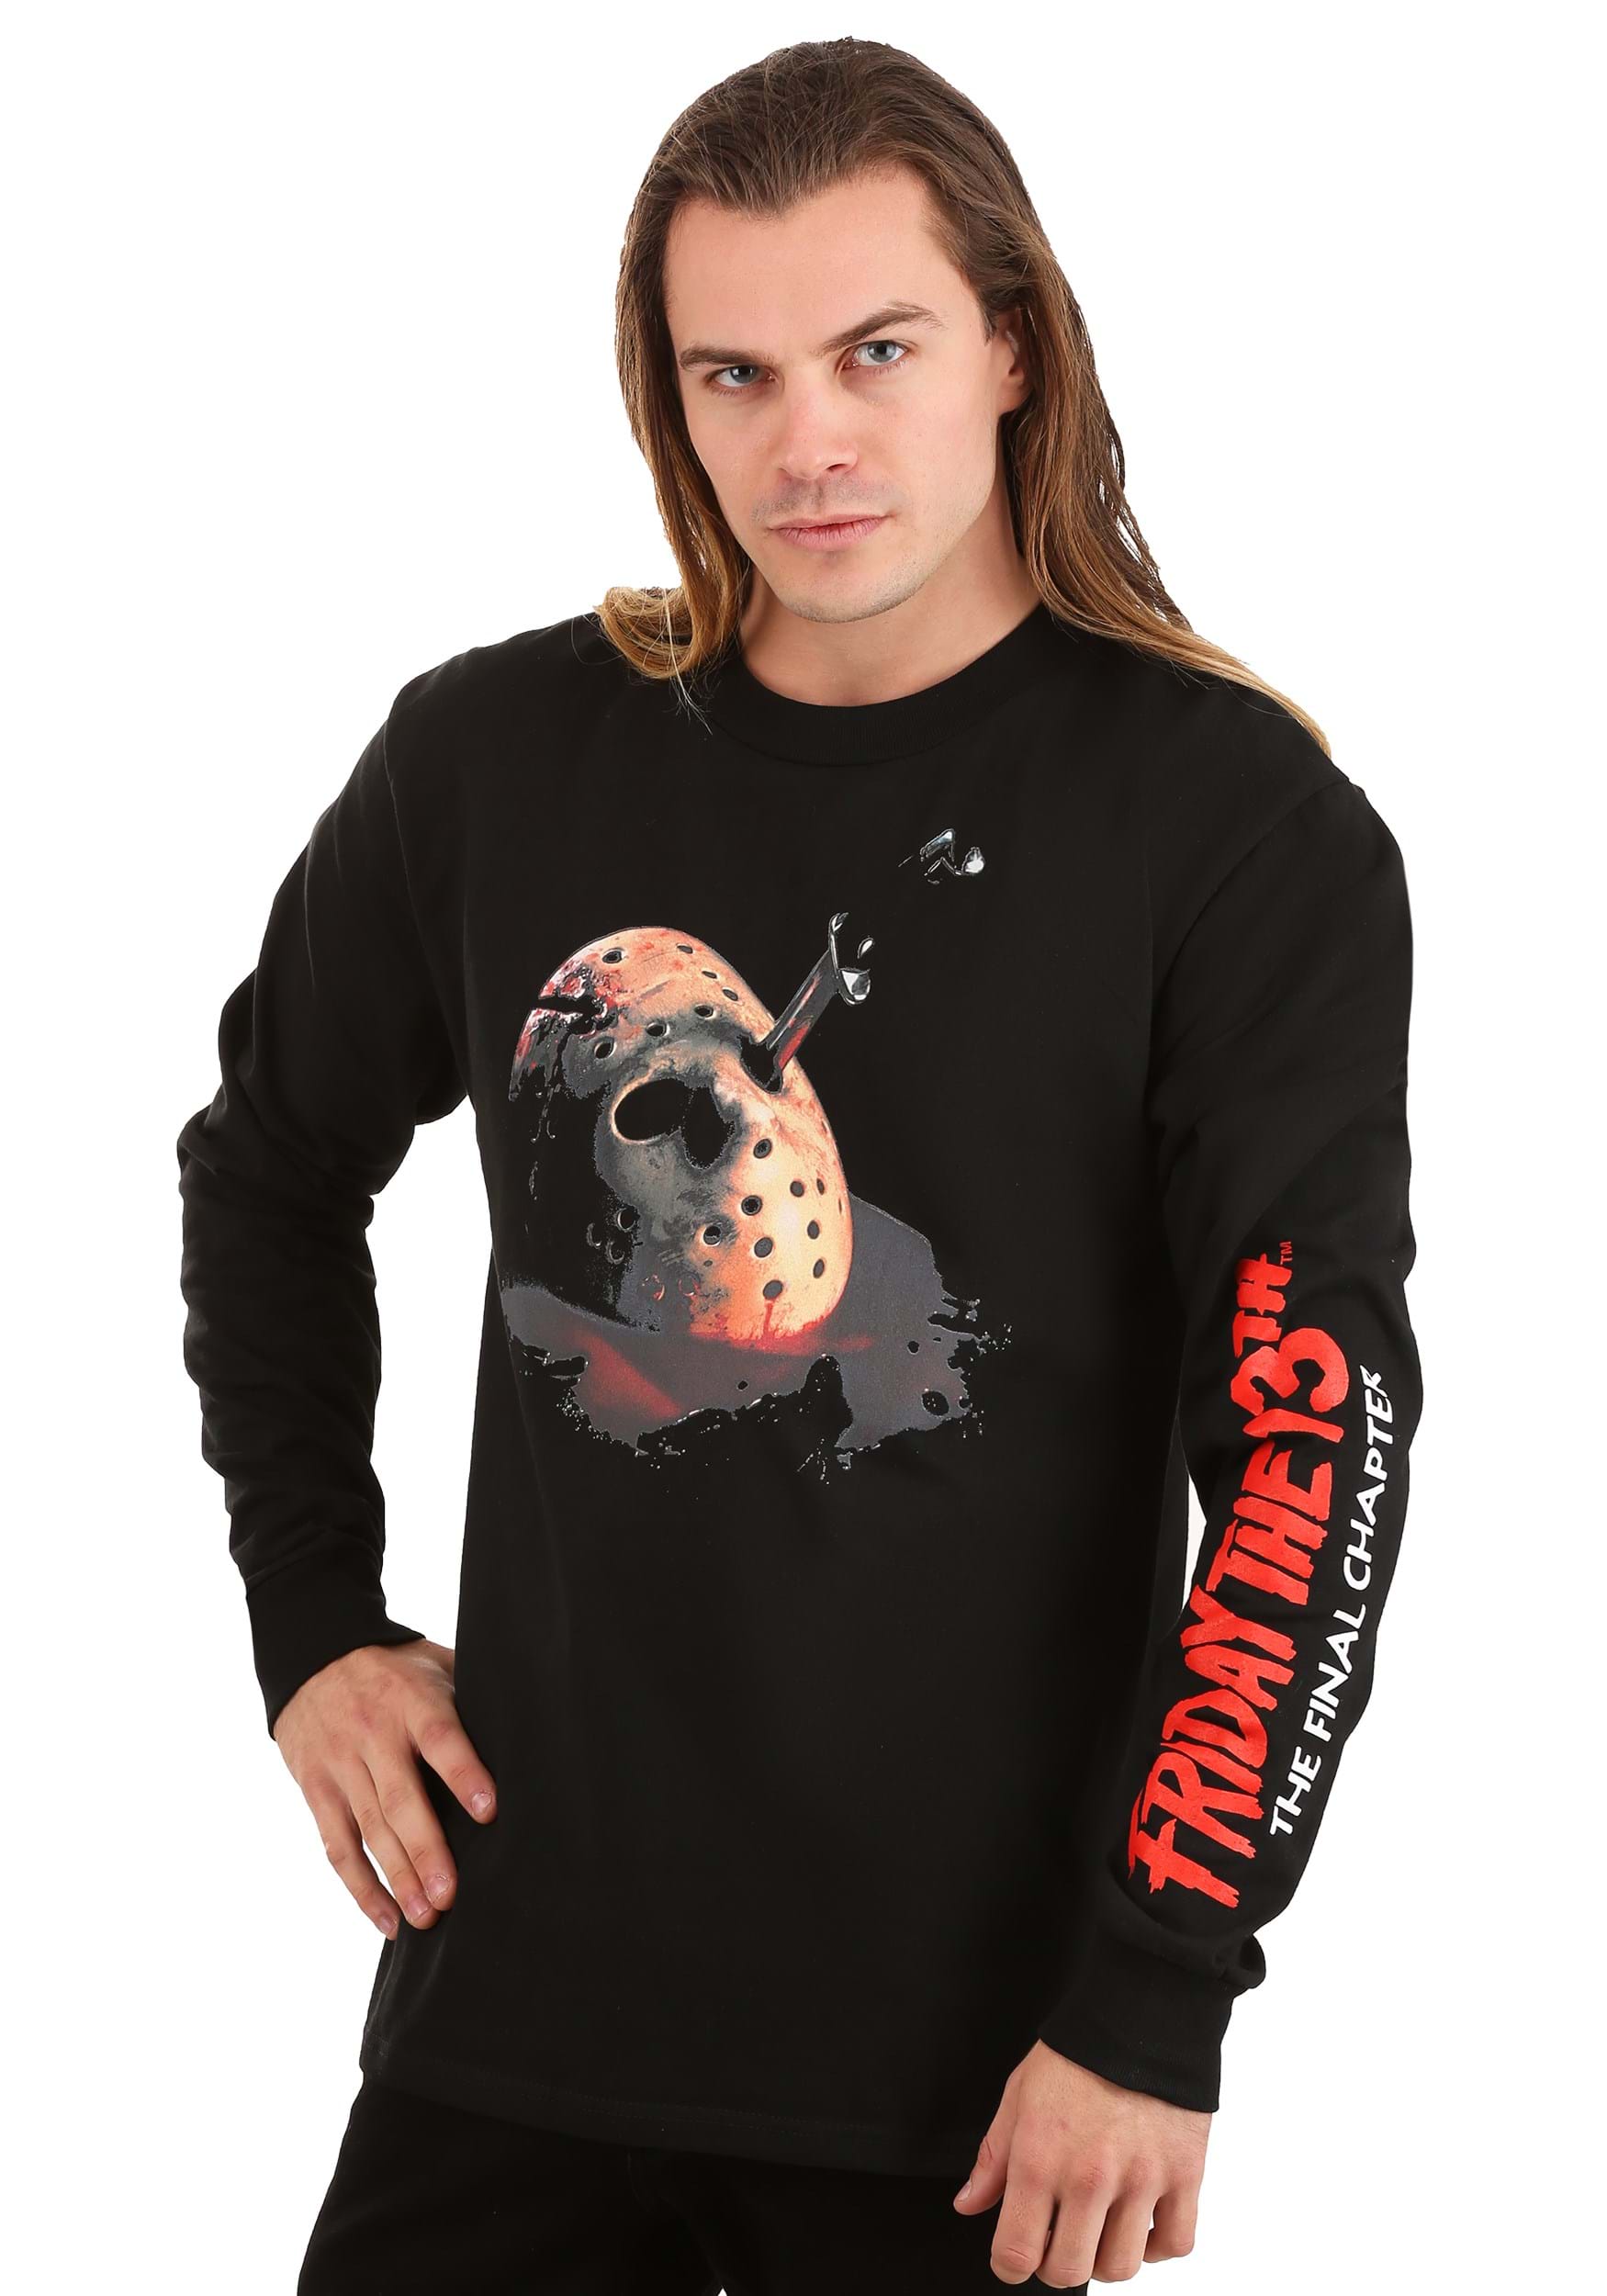 Friday the 13th The Final Chapter Long Sleeve Shirt for Adults